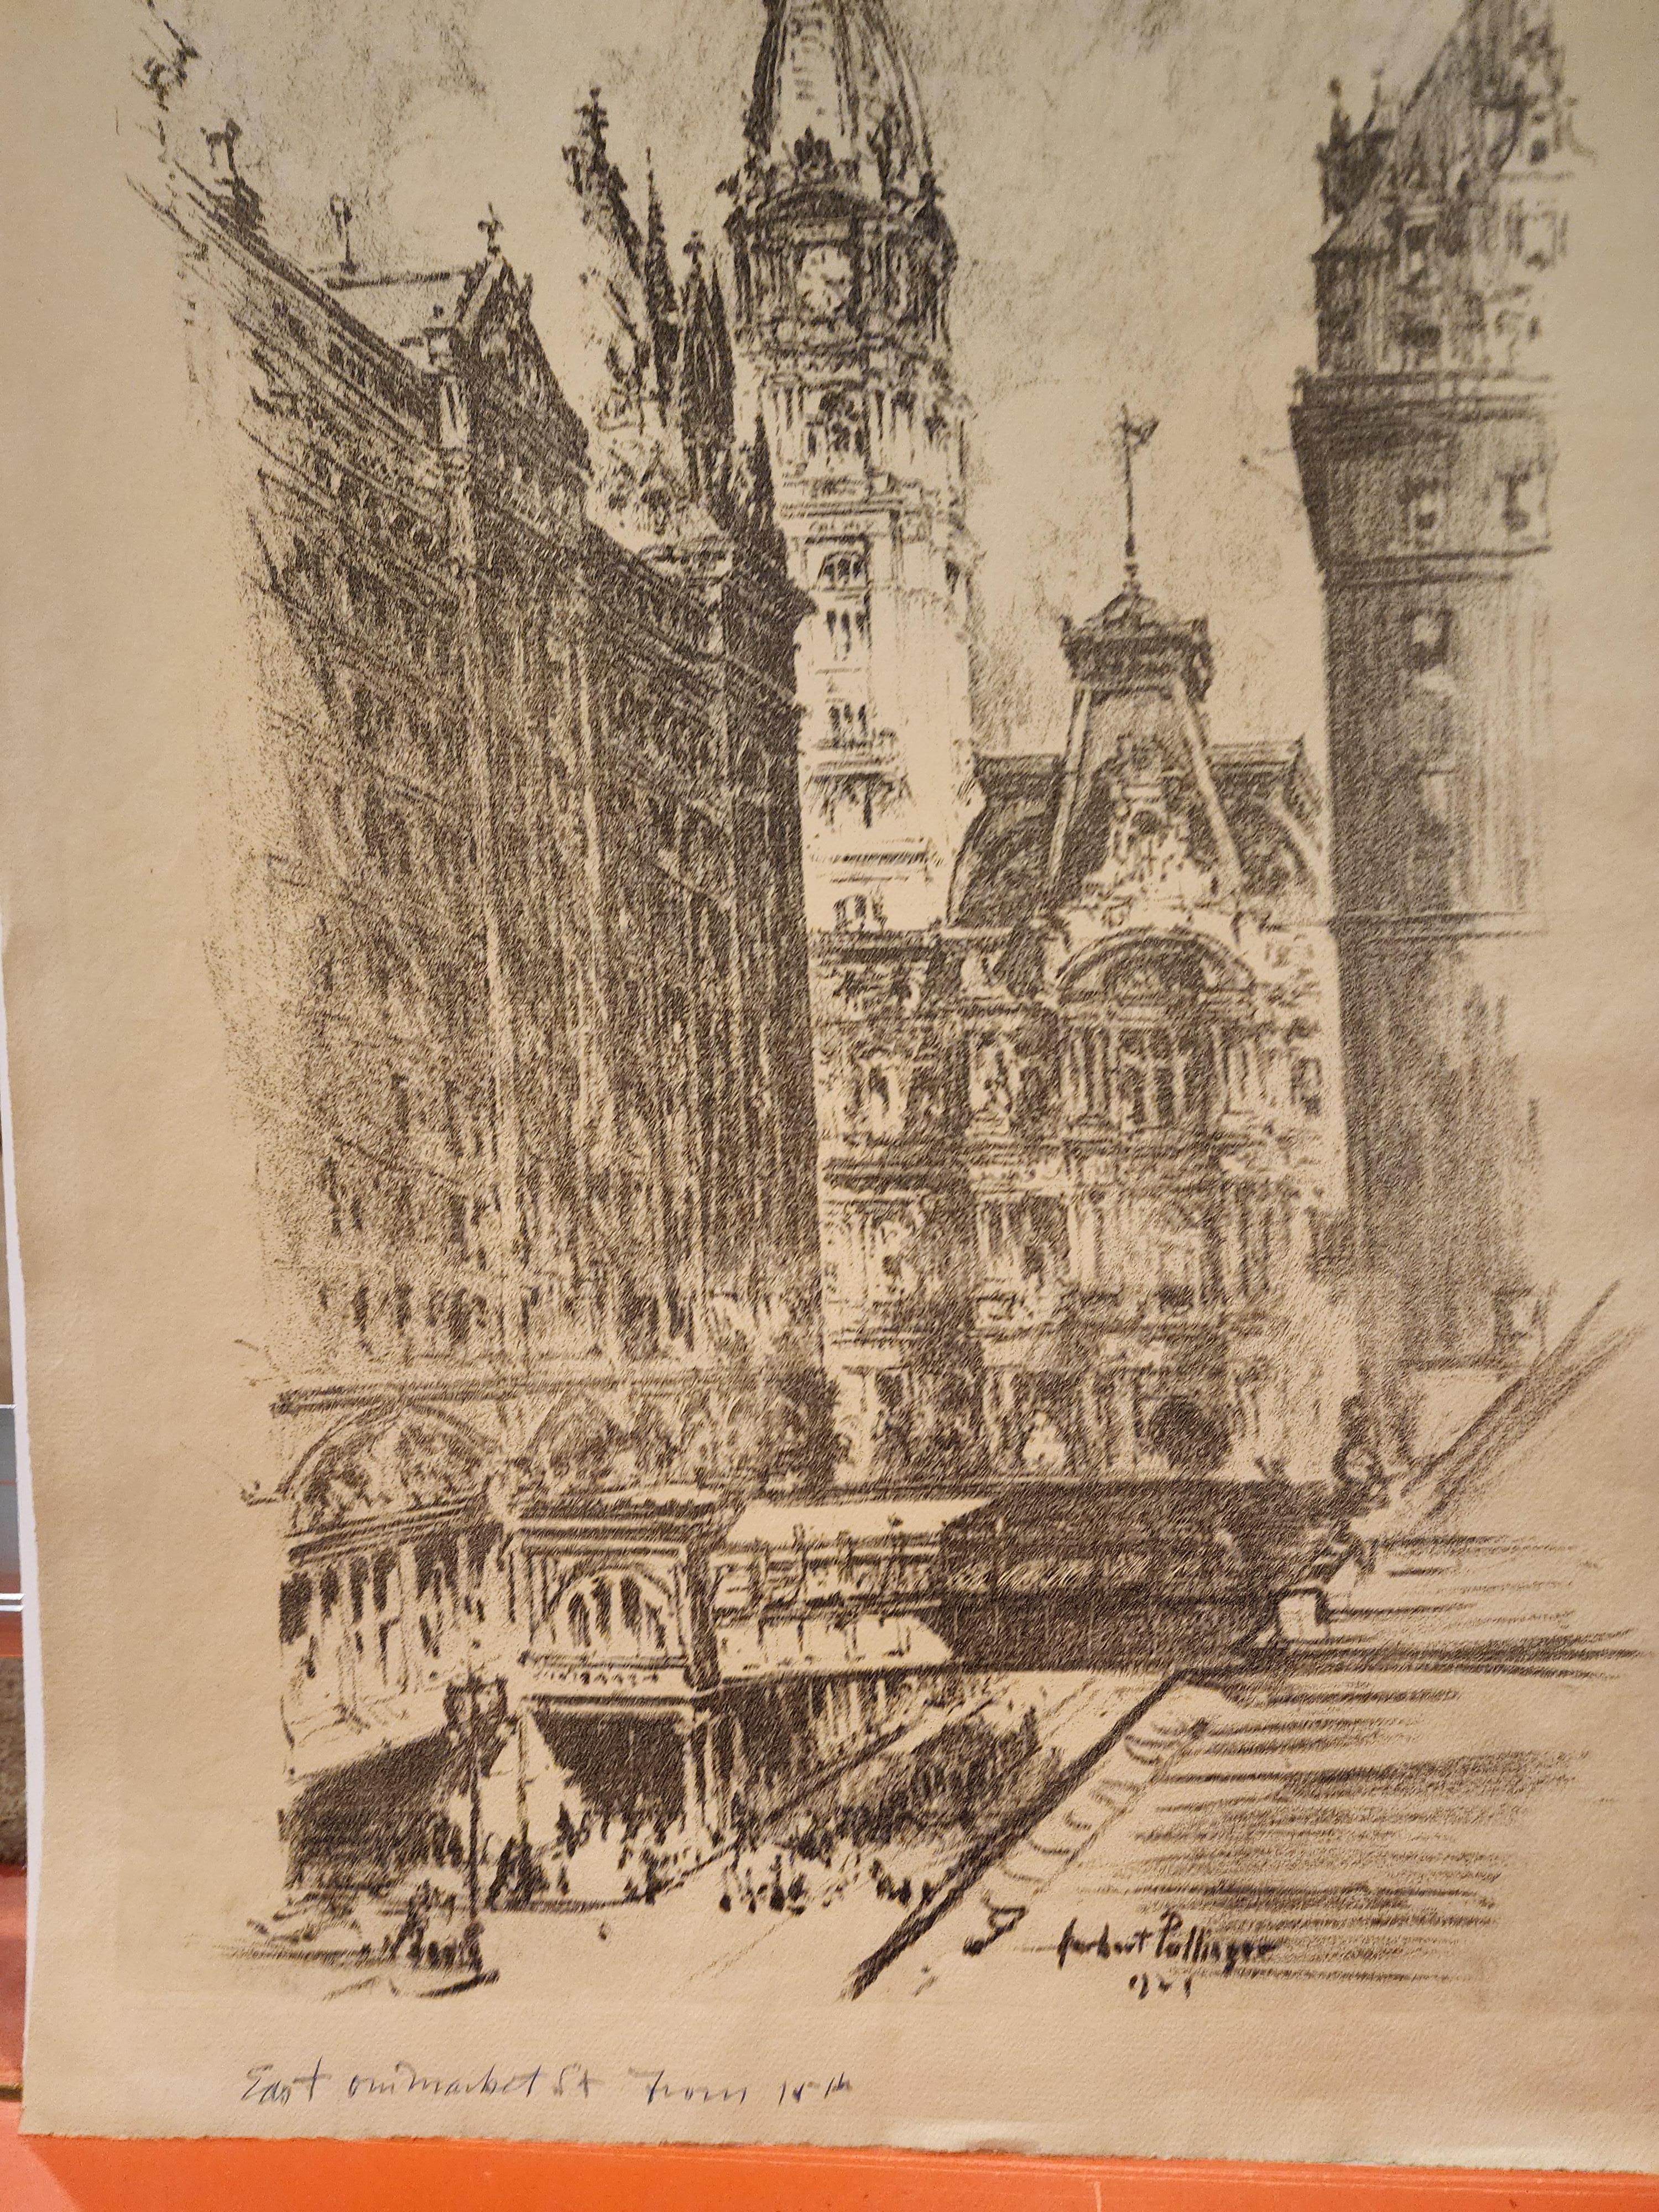 A monumental Philadelphia view by Herbert Pullinger.
Signed in the plate and dated 1921.
The title is noted in ink below the image 